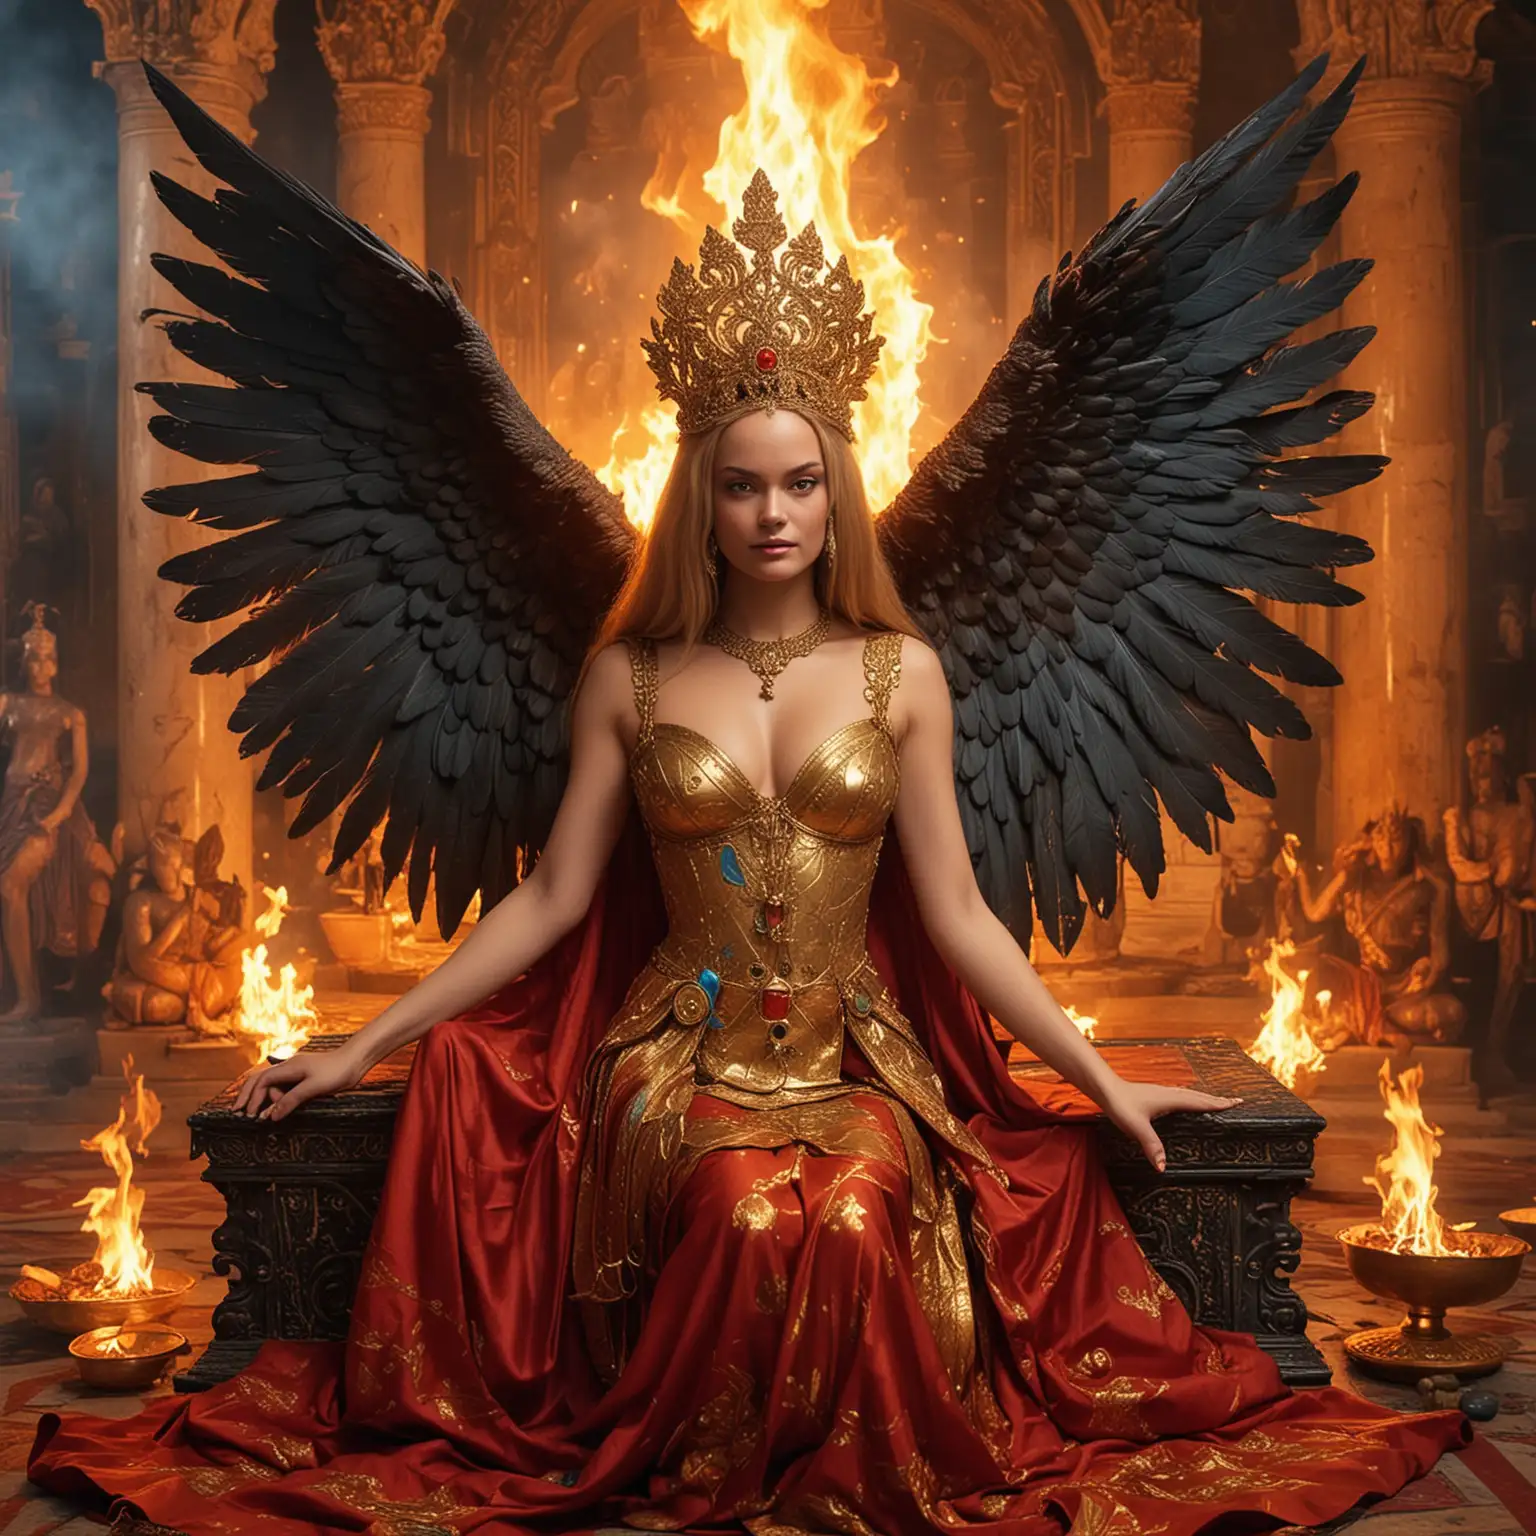 Mystical Goddess Empress with Honey Hair and Wings Surrounded by Fire and Deities